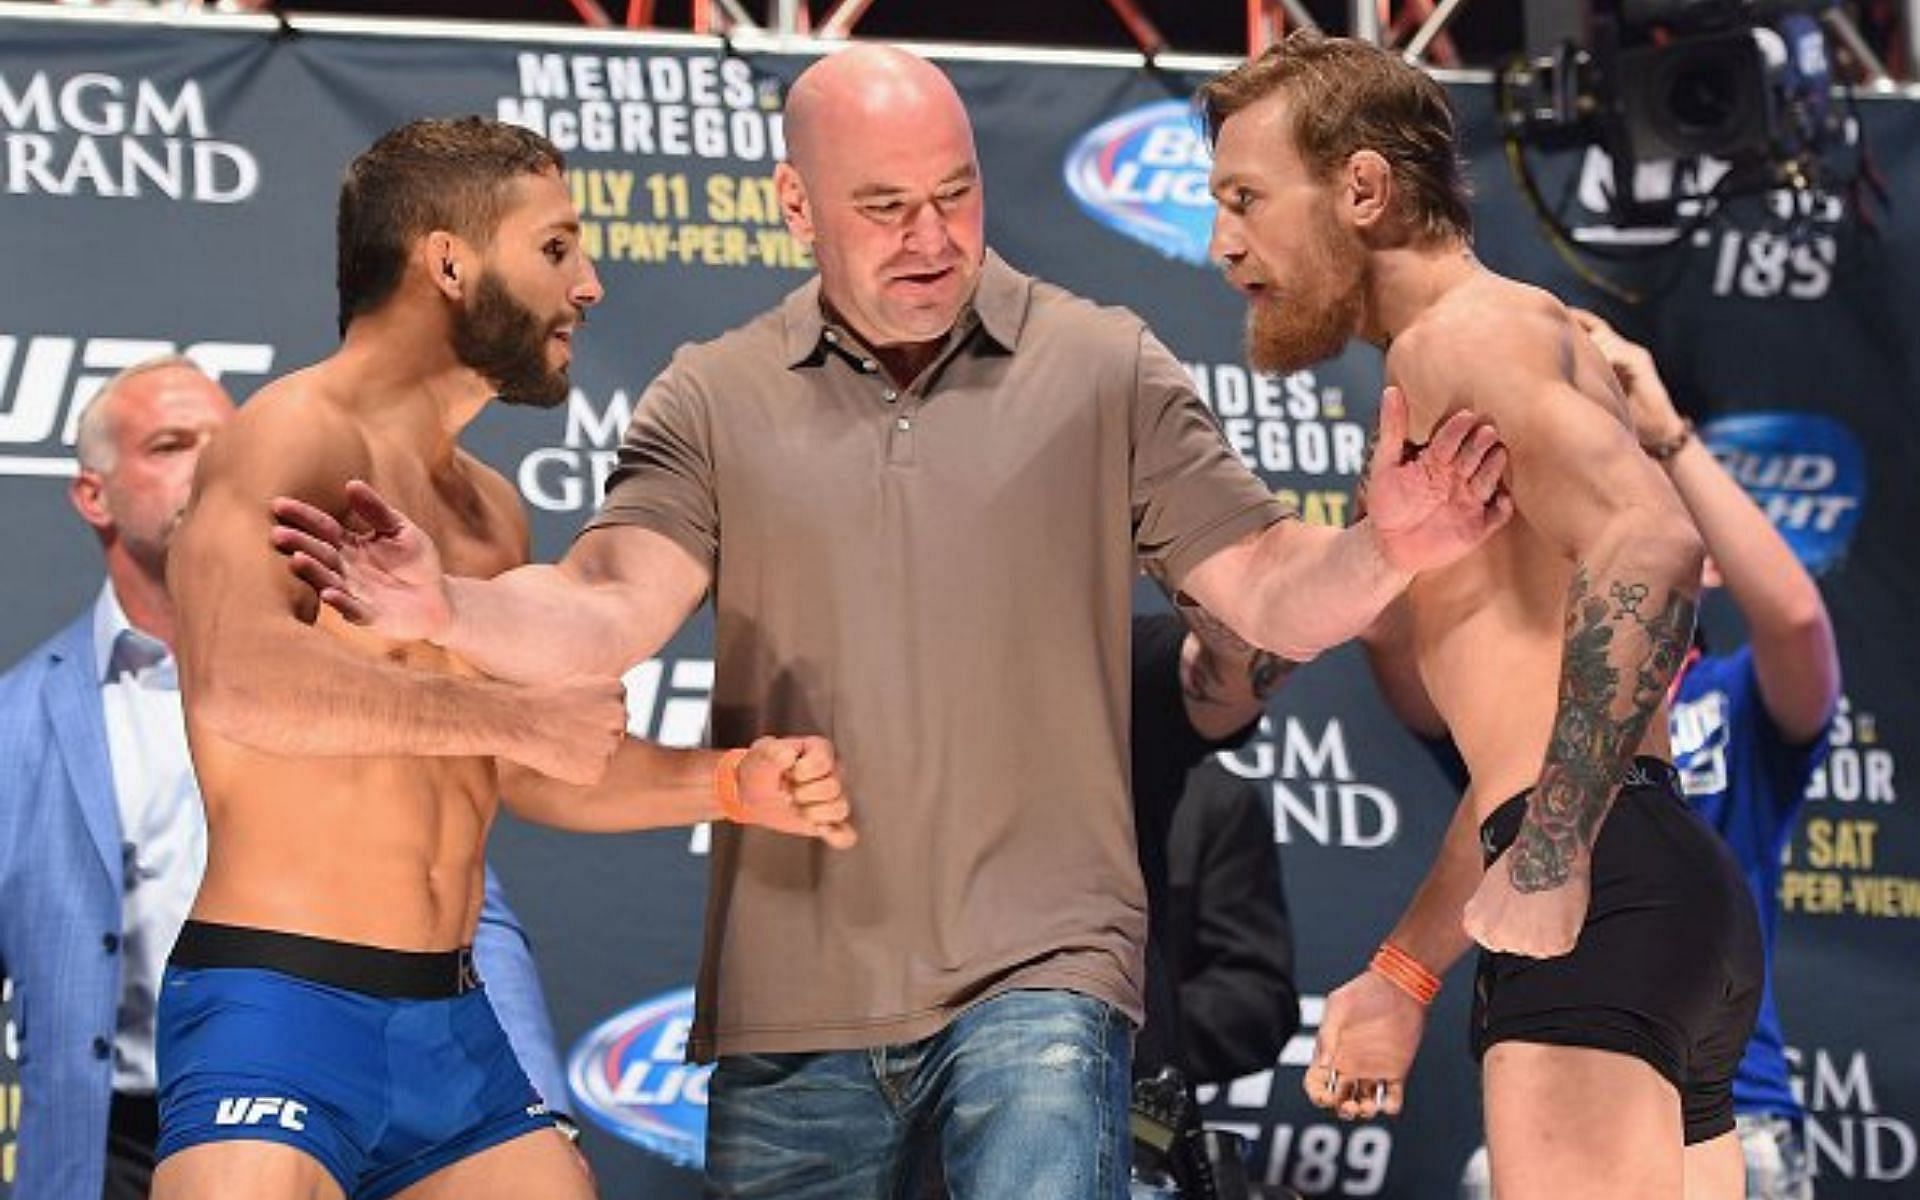 Chad Mendes and Conor McGregor during the face offs ahead of their UFC 189 clash